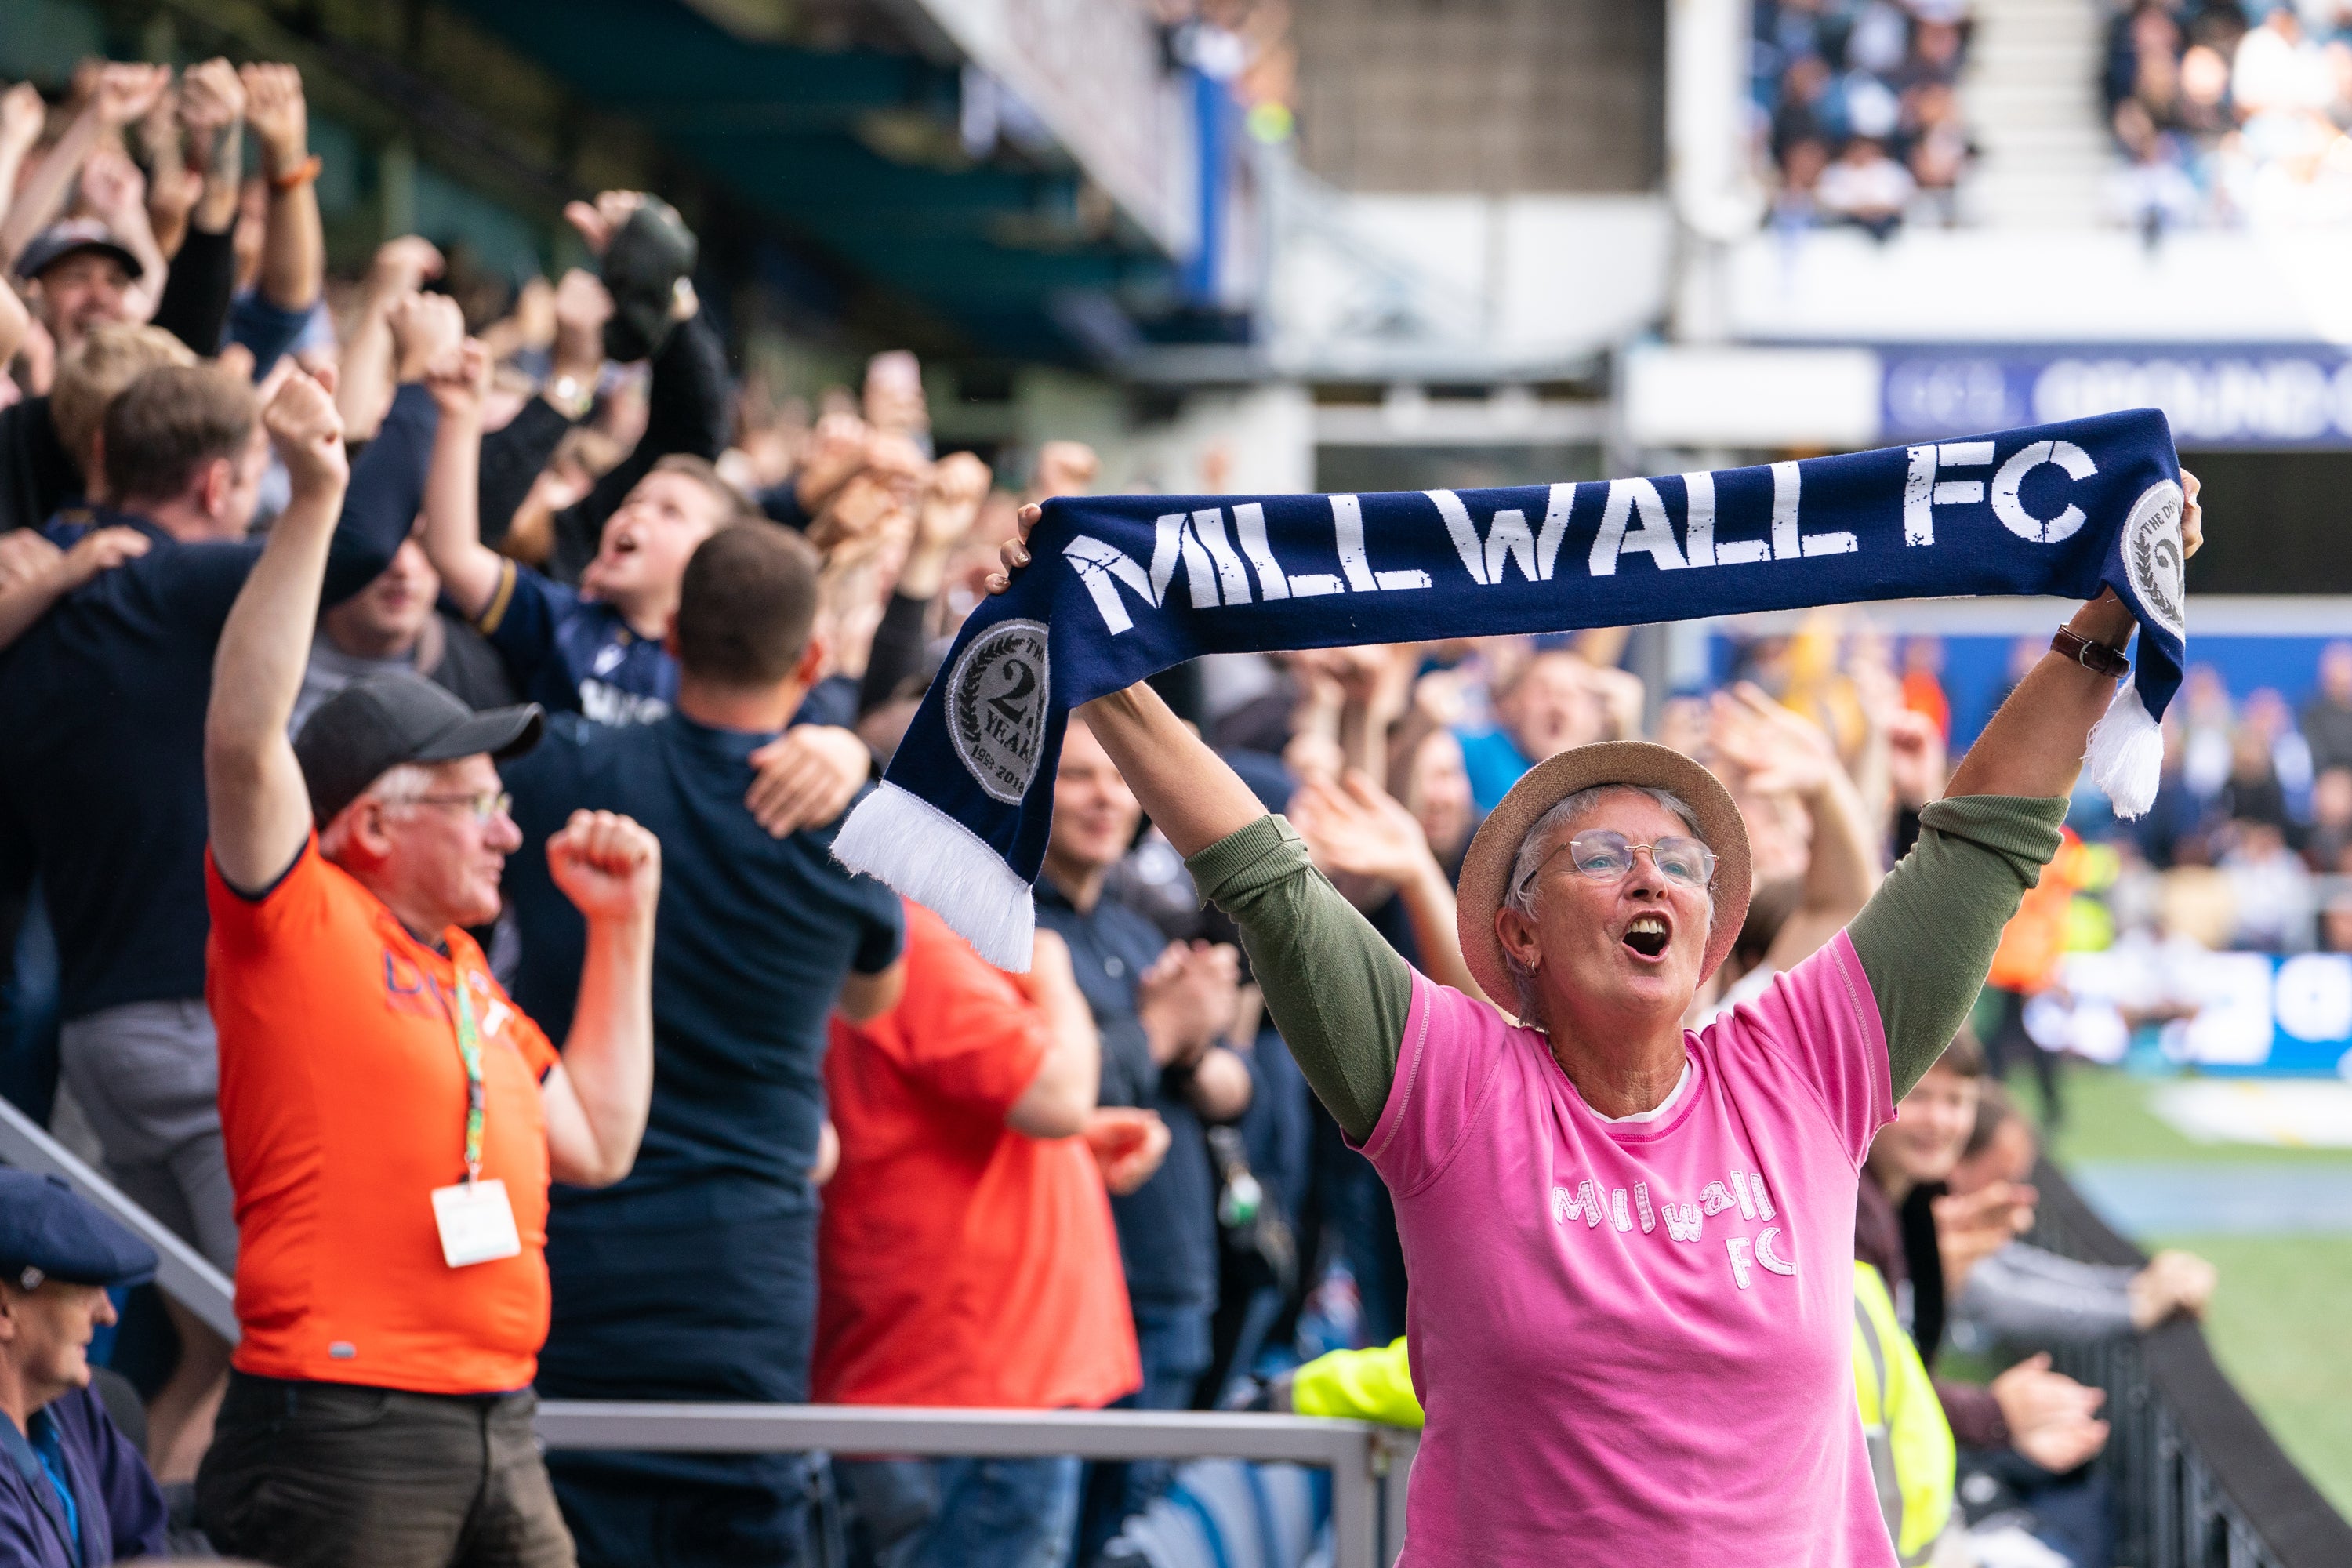 Millwall fans celebrate Jed Wallace’s early goal in the 1-1 draw against QPR at the Kiyan Prince Foundation Stadium (Dominic Lipinski/PA).